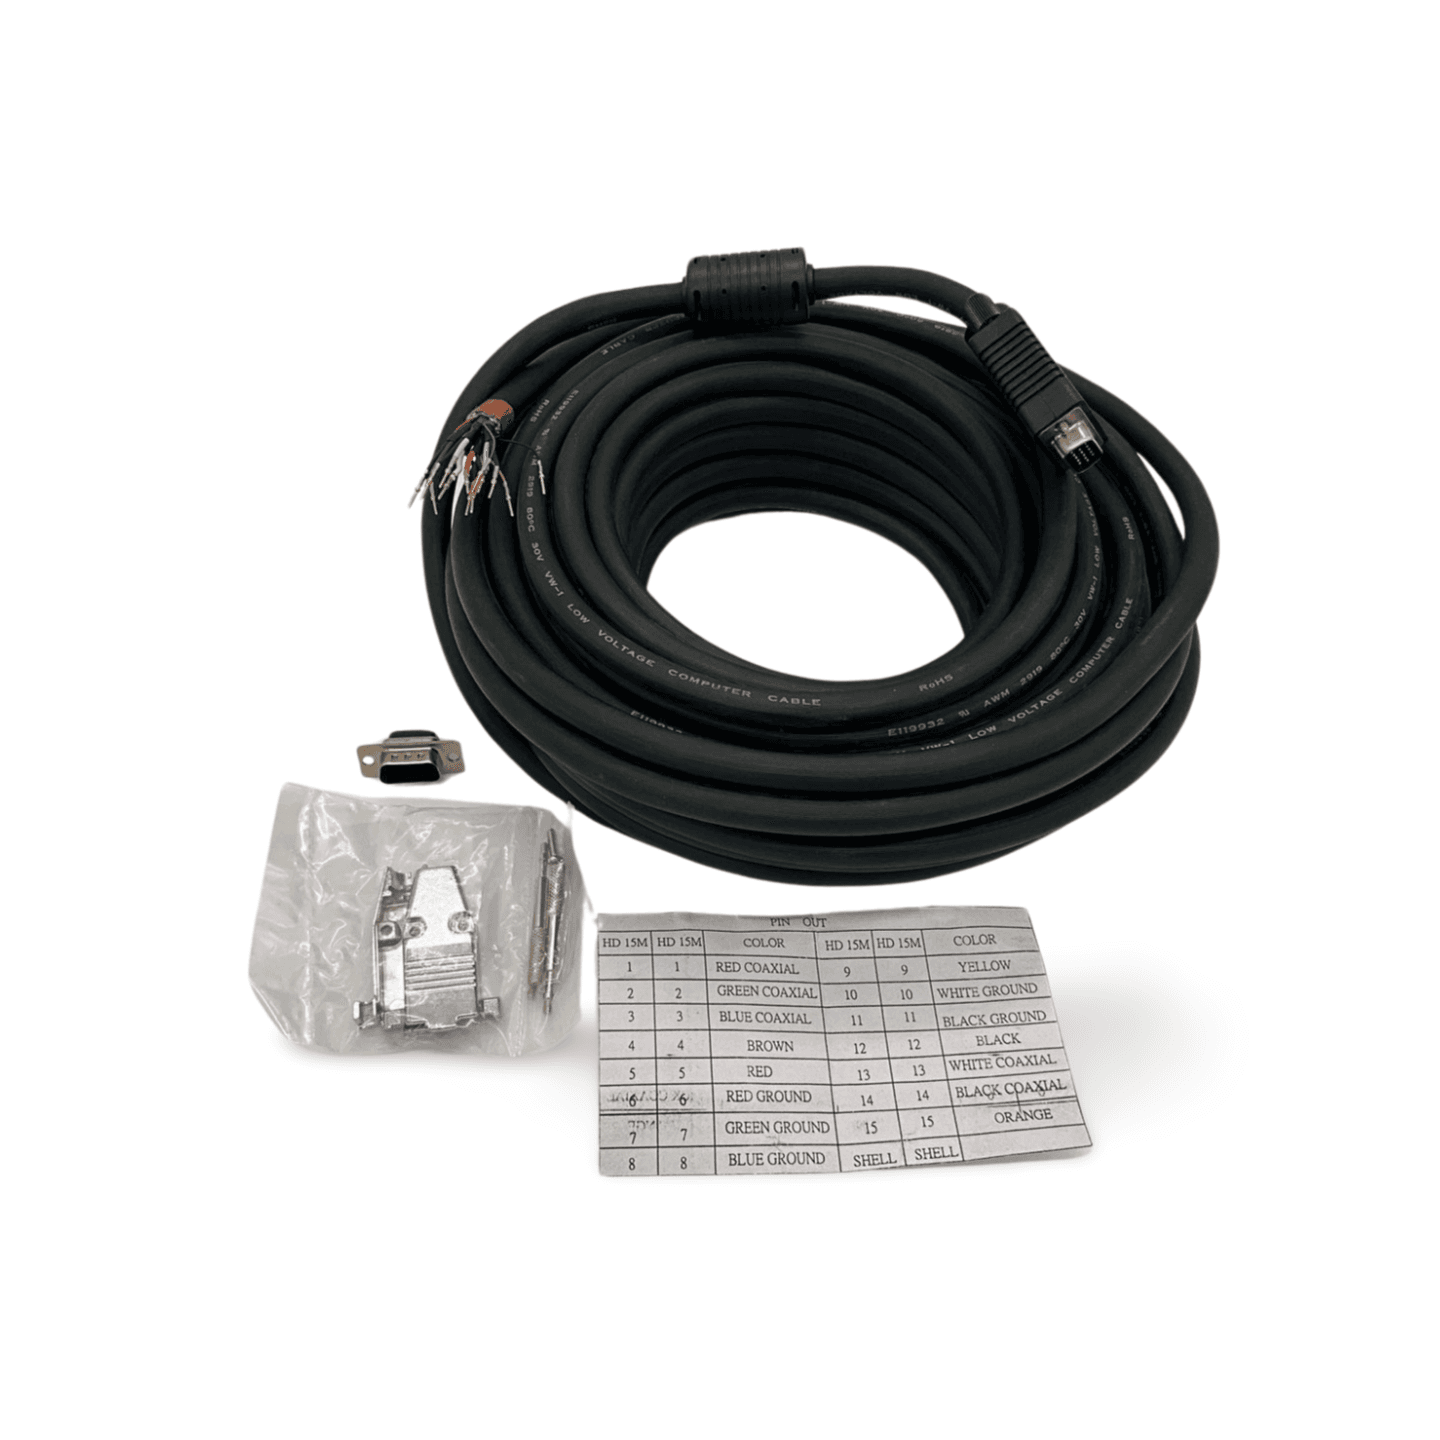 50ft UXGA SVGA Monitor Cable HD15 Male to Male with Conduit Feed black